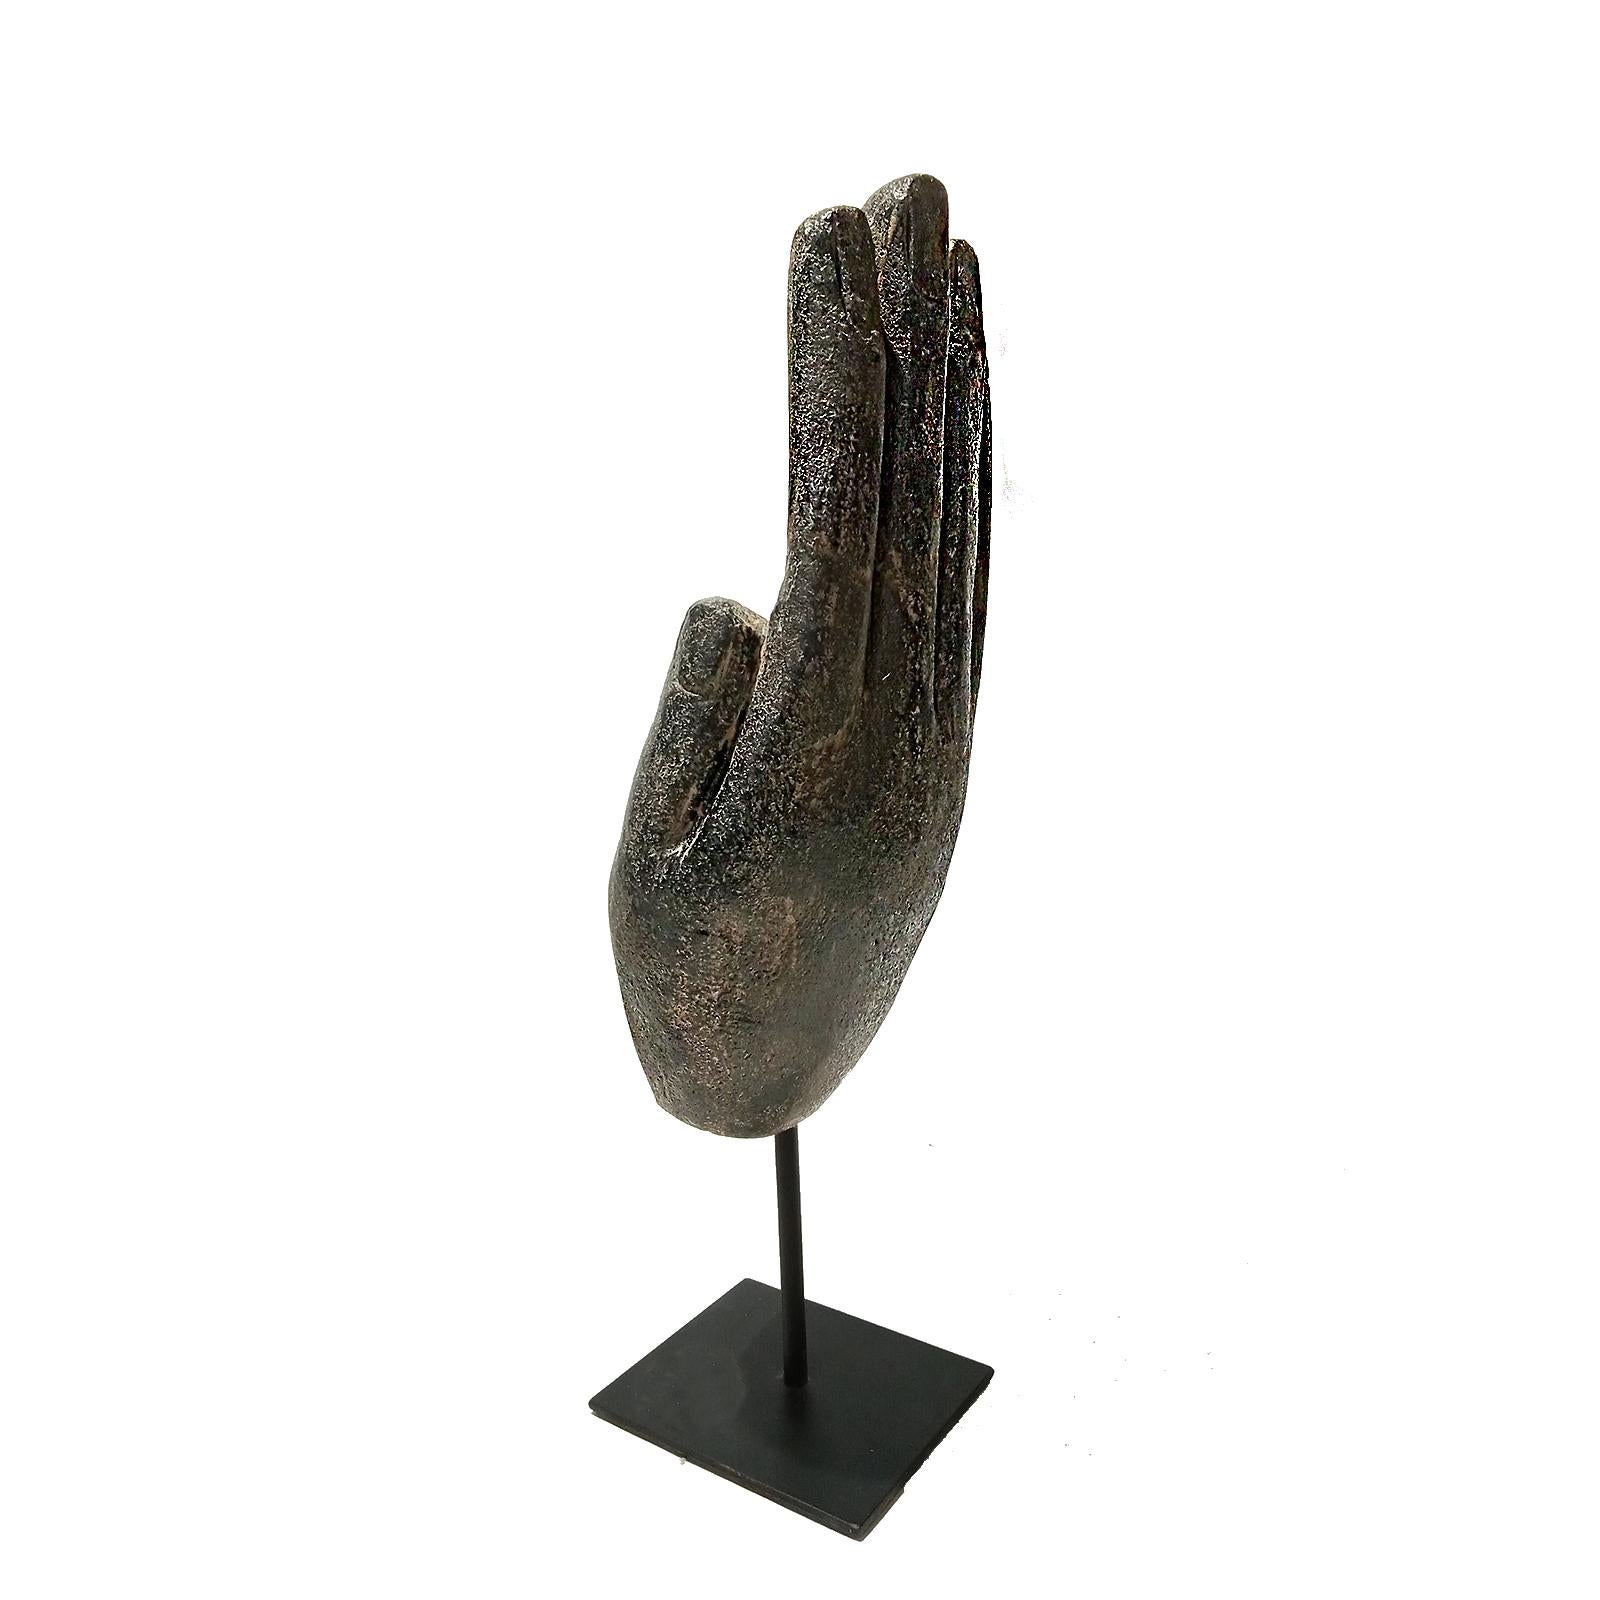 Three Volcanic Rock Hand Sculptures, Mid 20th Century In Good Condition For Sale In New York, NY